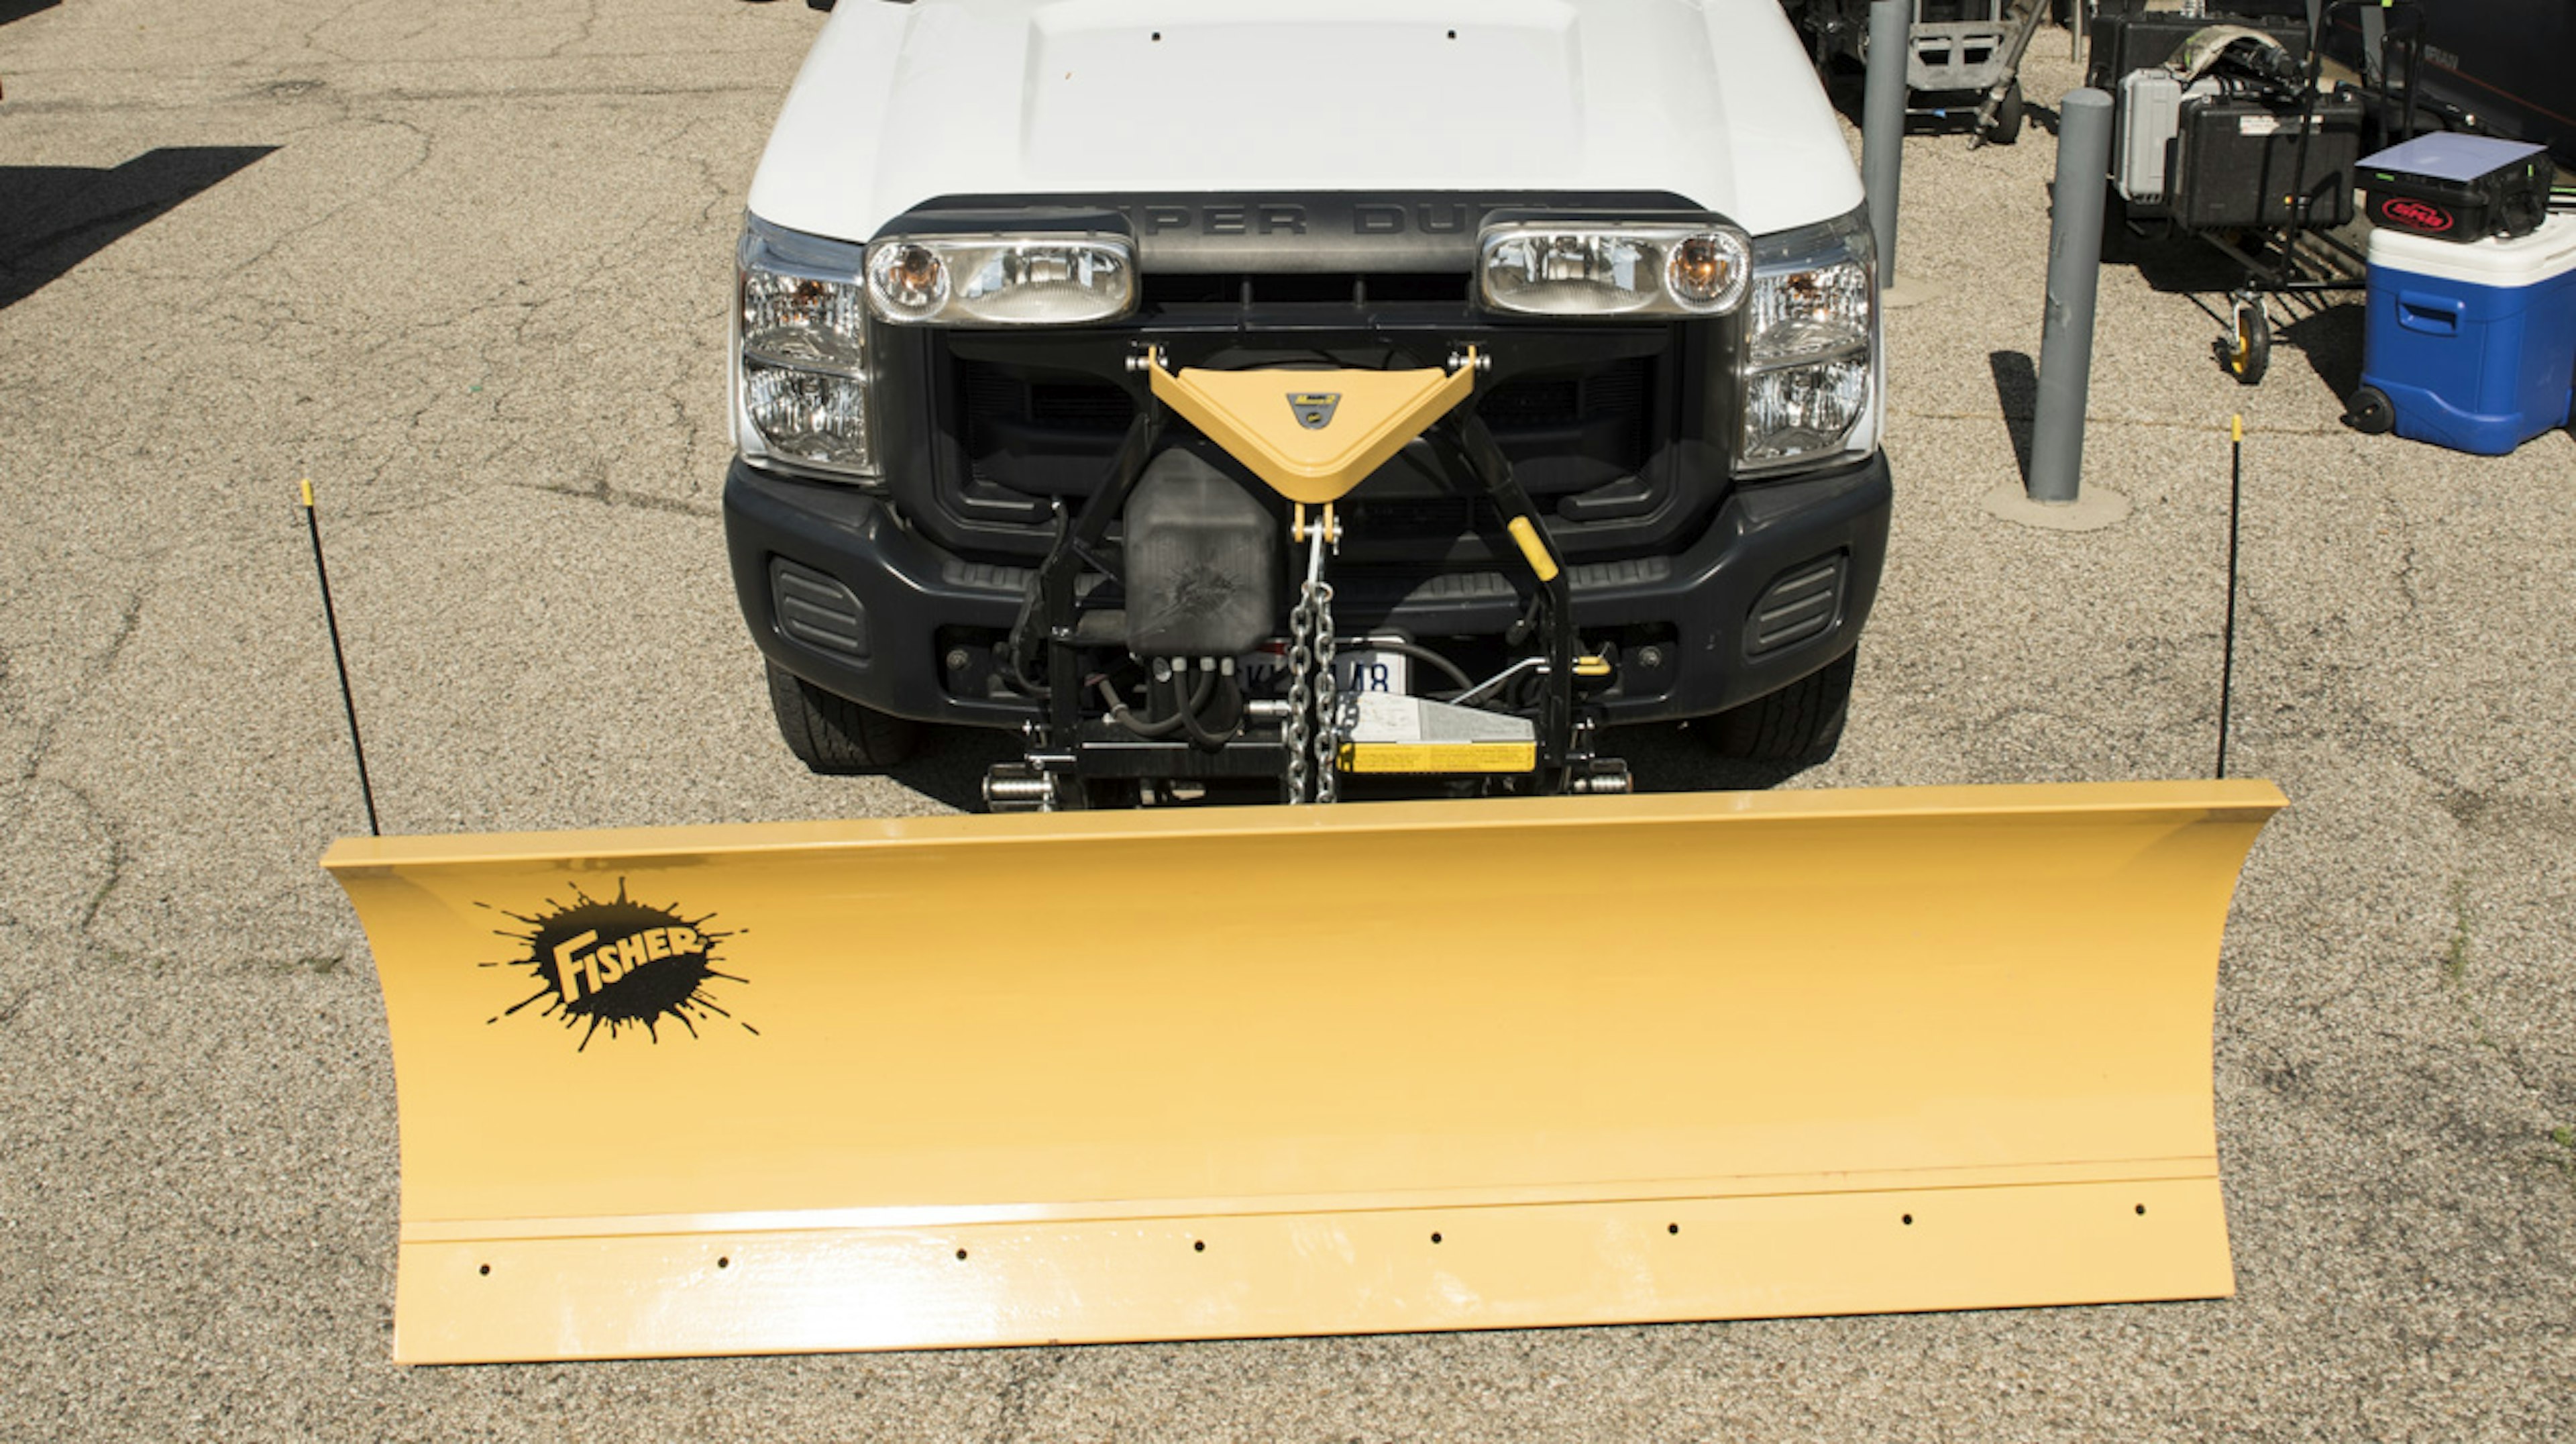 Straight Plow Attachment for Snow Removal